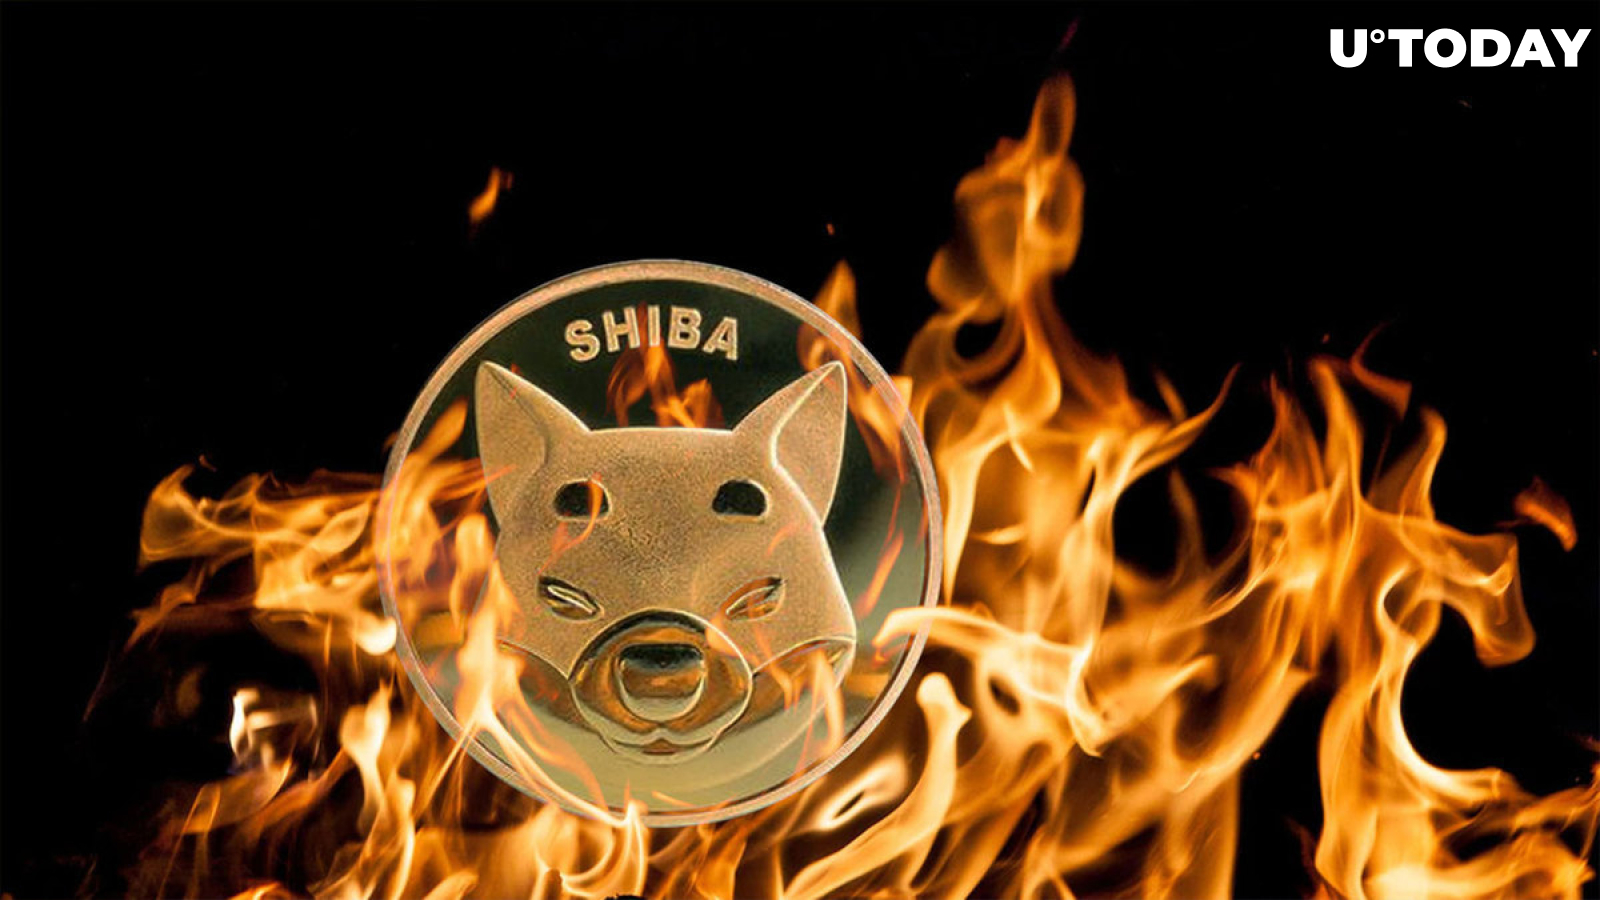 Over Tens of Billions of SHIB Burned in May as the Following Happened to Shiba Inu